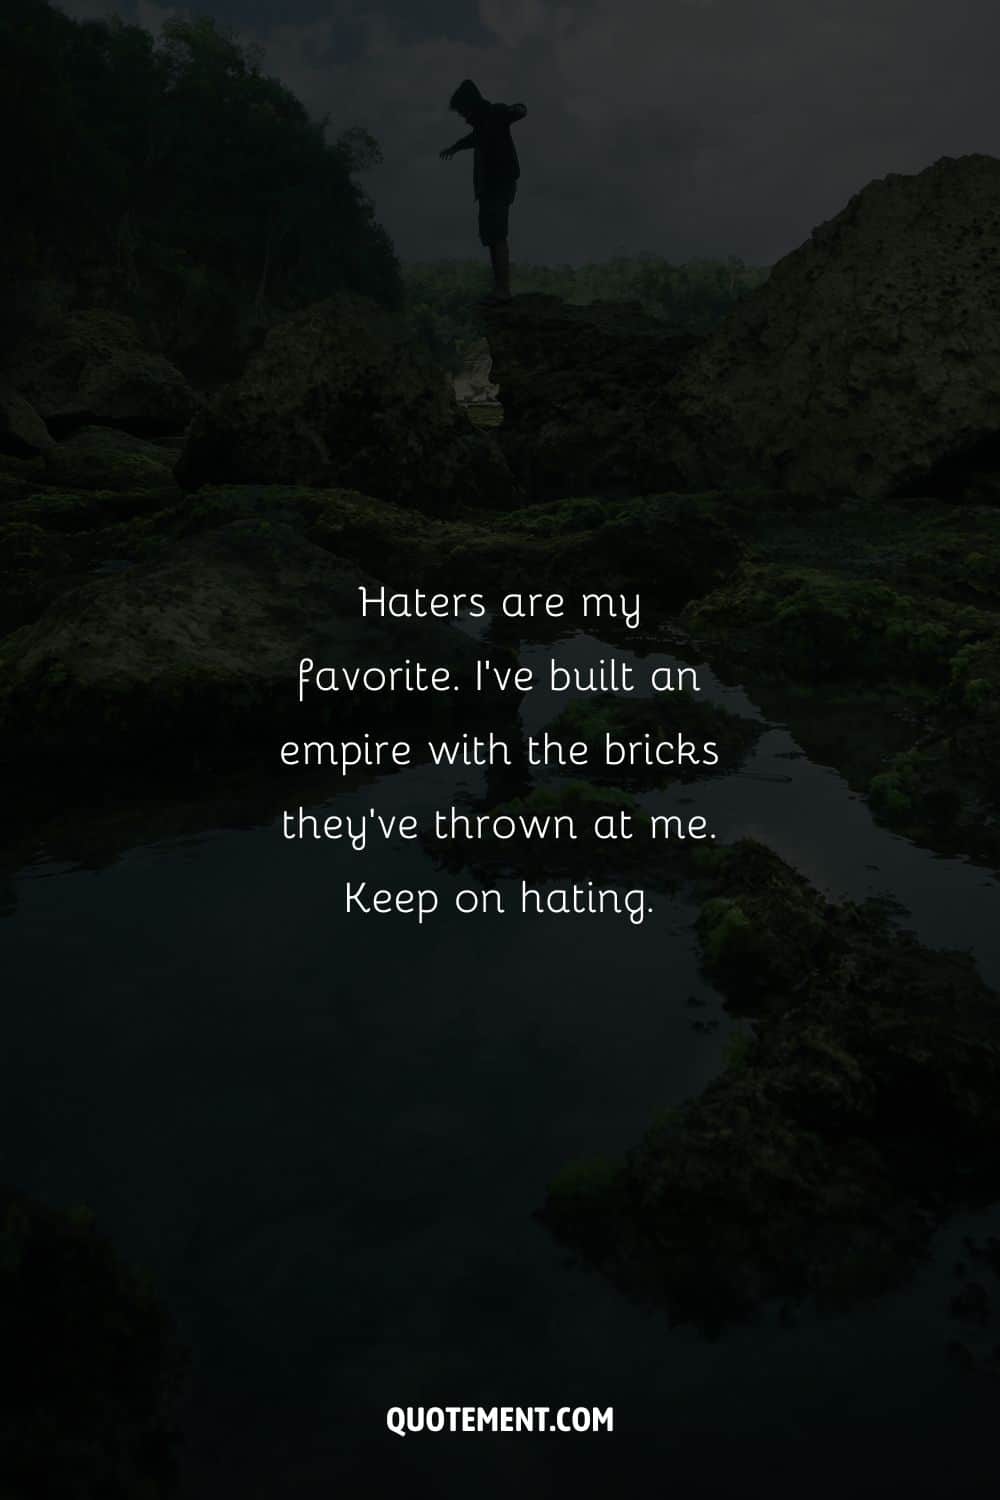 Haters are my favorite. I’ve built an empire with the bricks they’ve thrown at me.